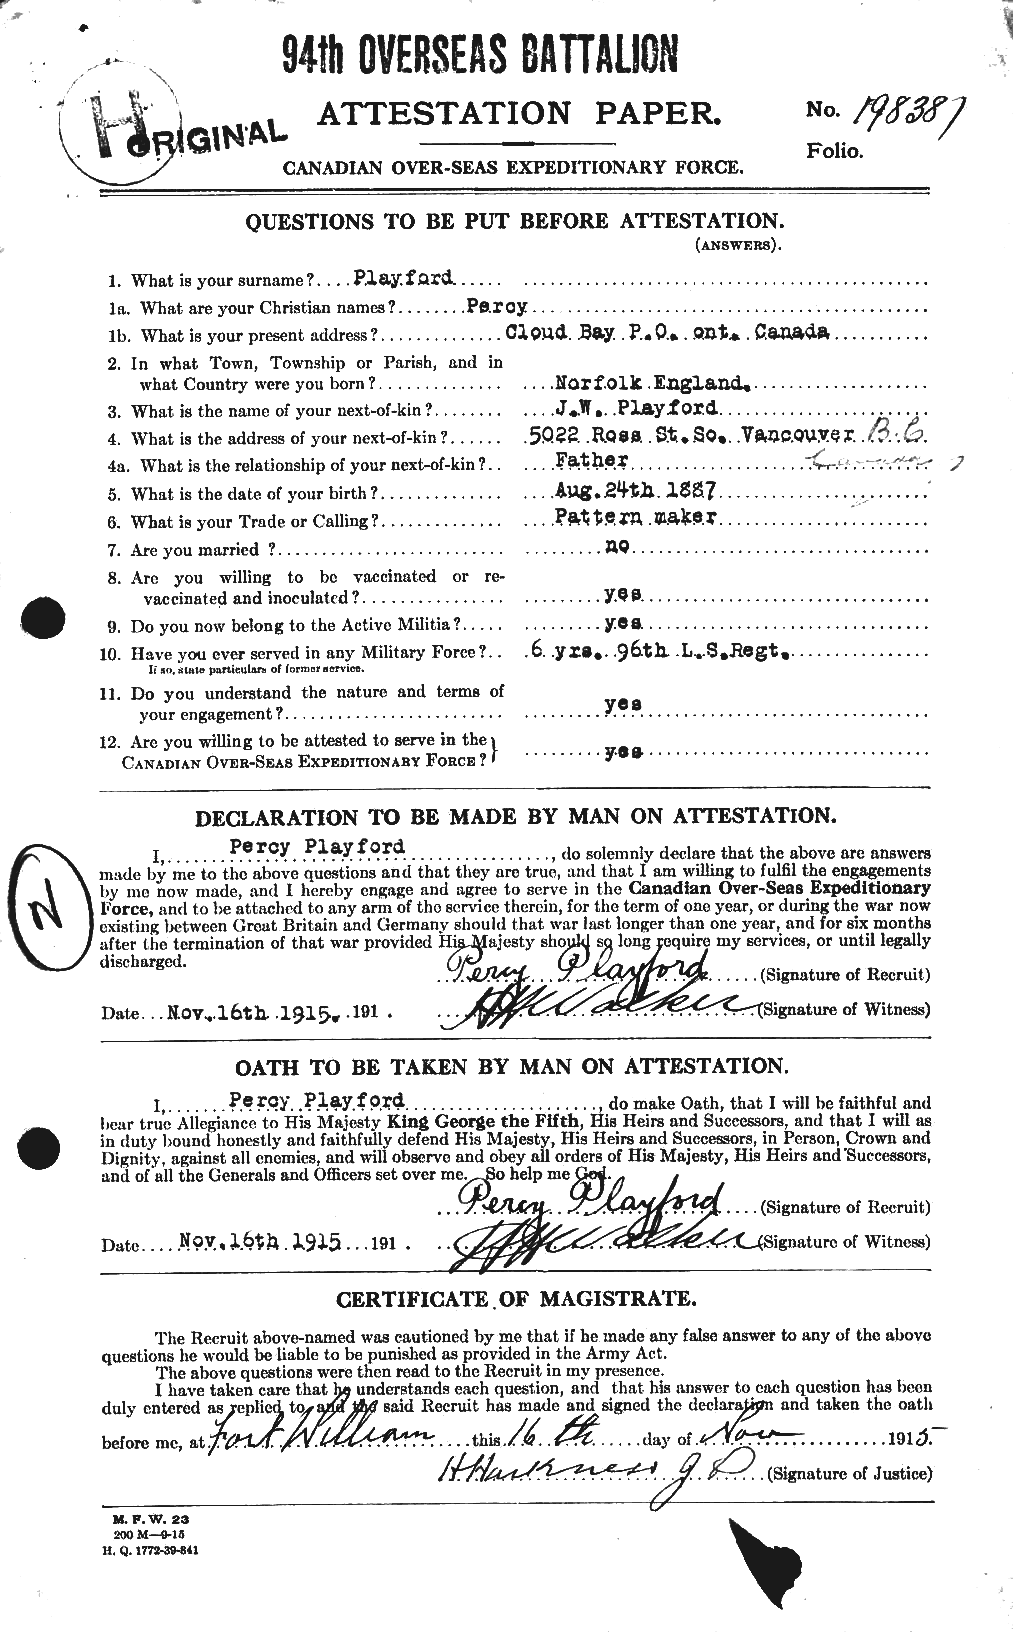 Personnel Records of the First World War - CEF 580333a